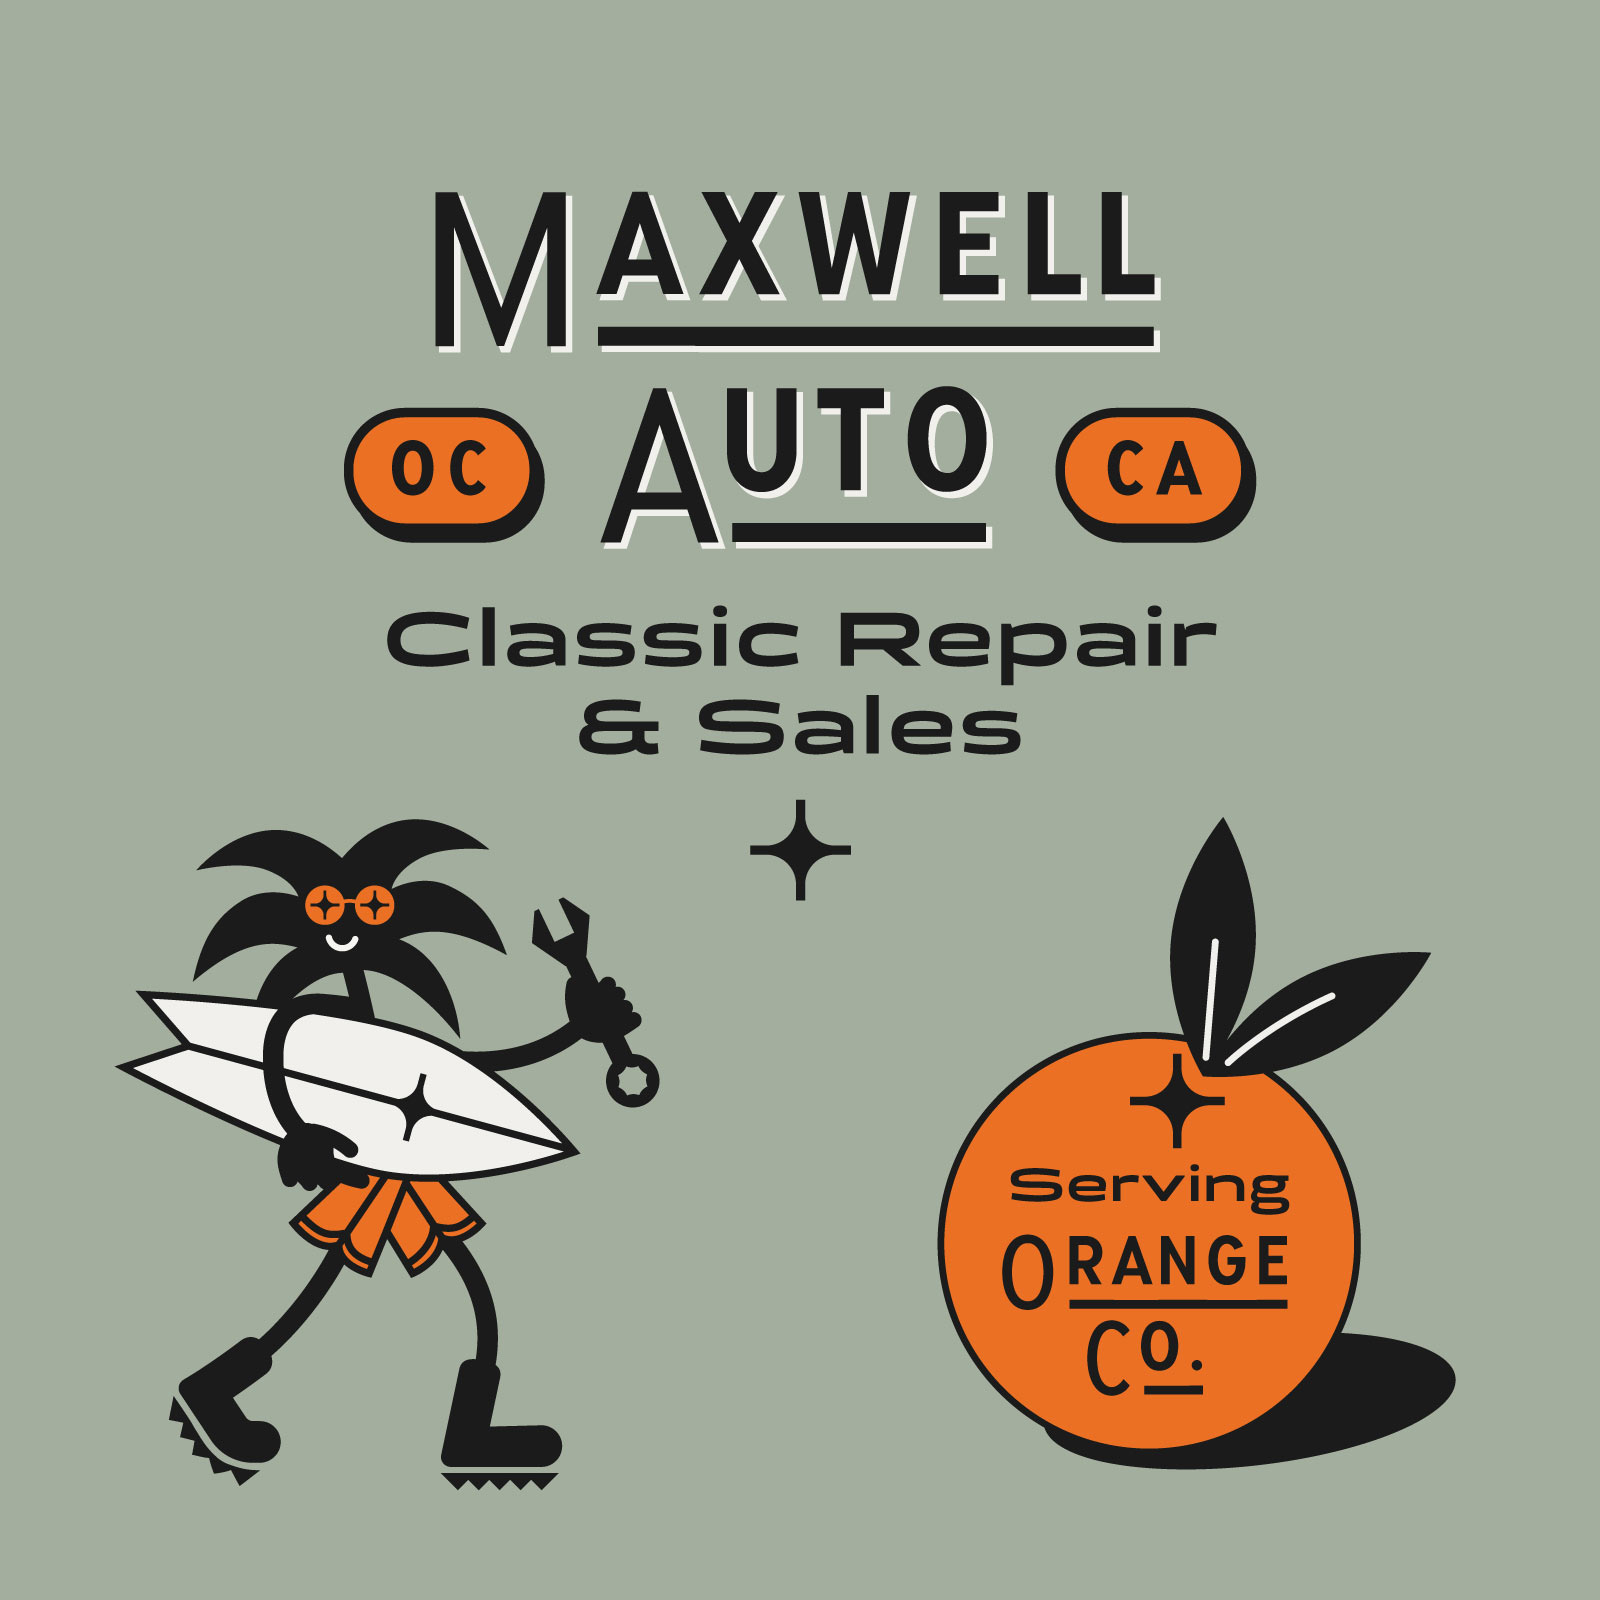 Chapman Ave Font Maxwell Auto Logo system color